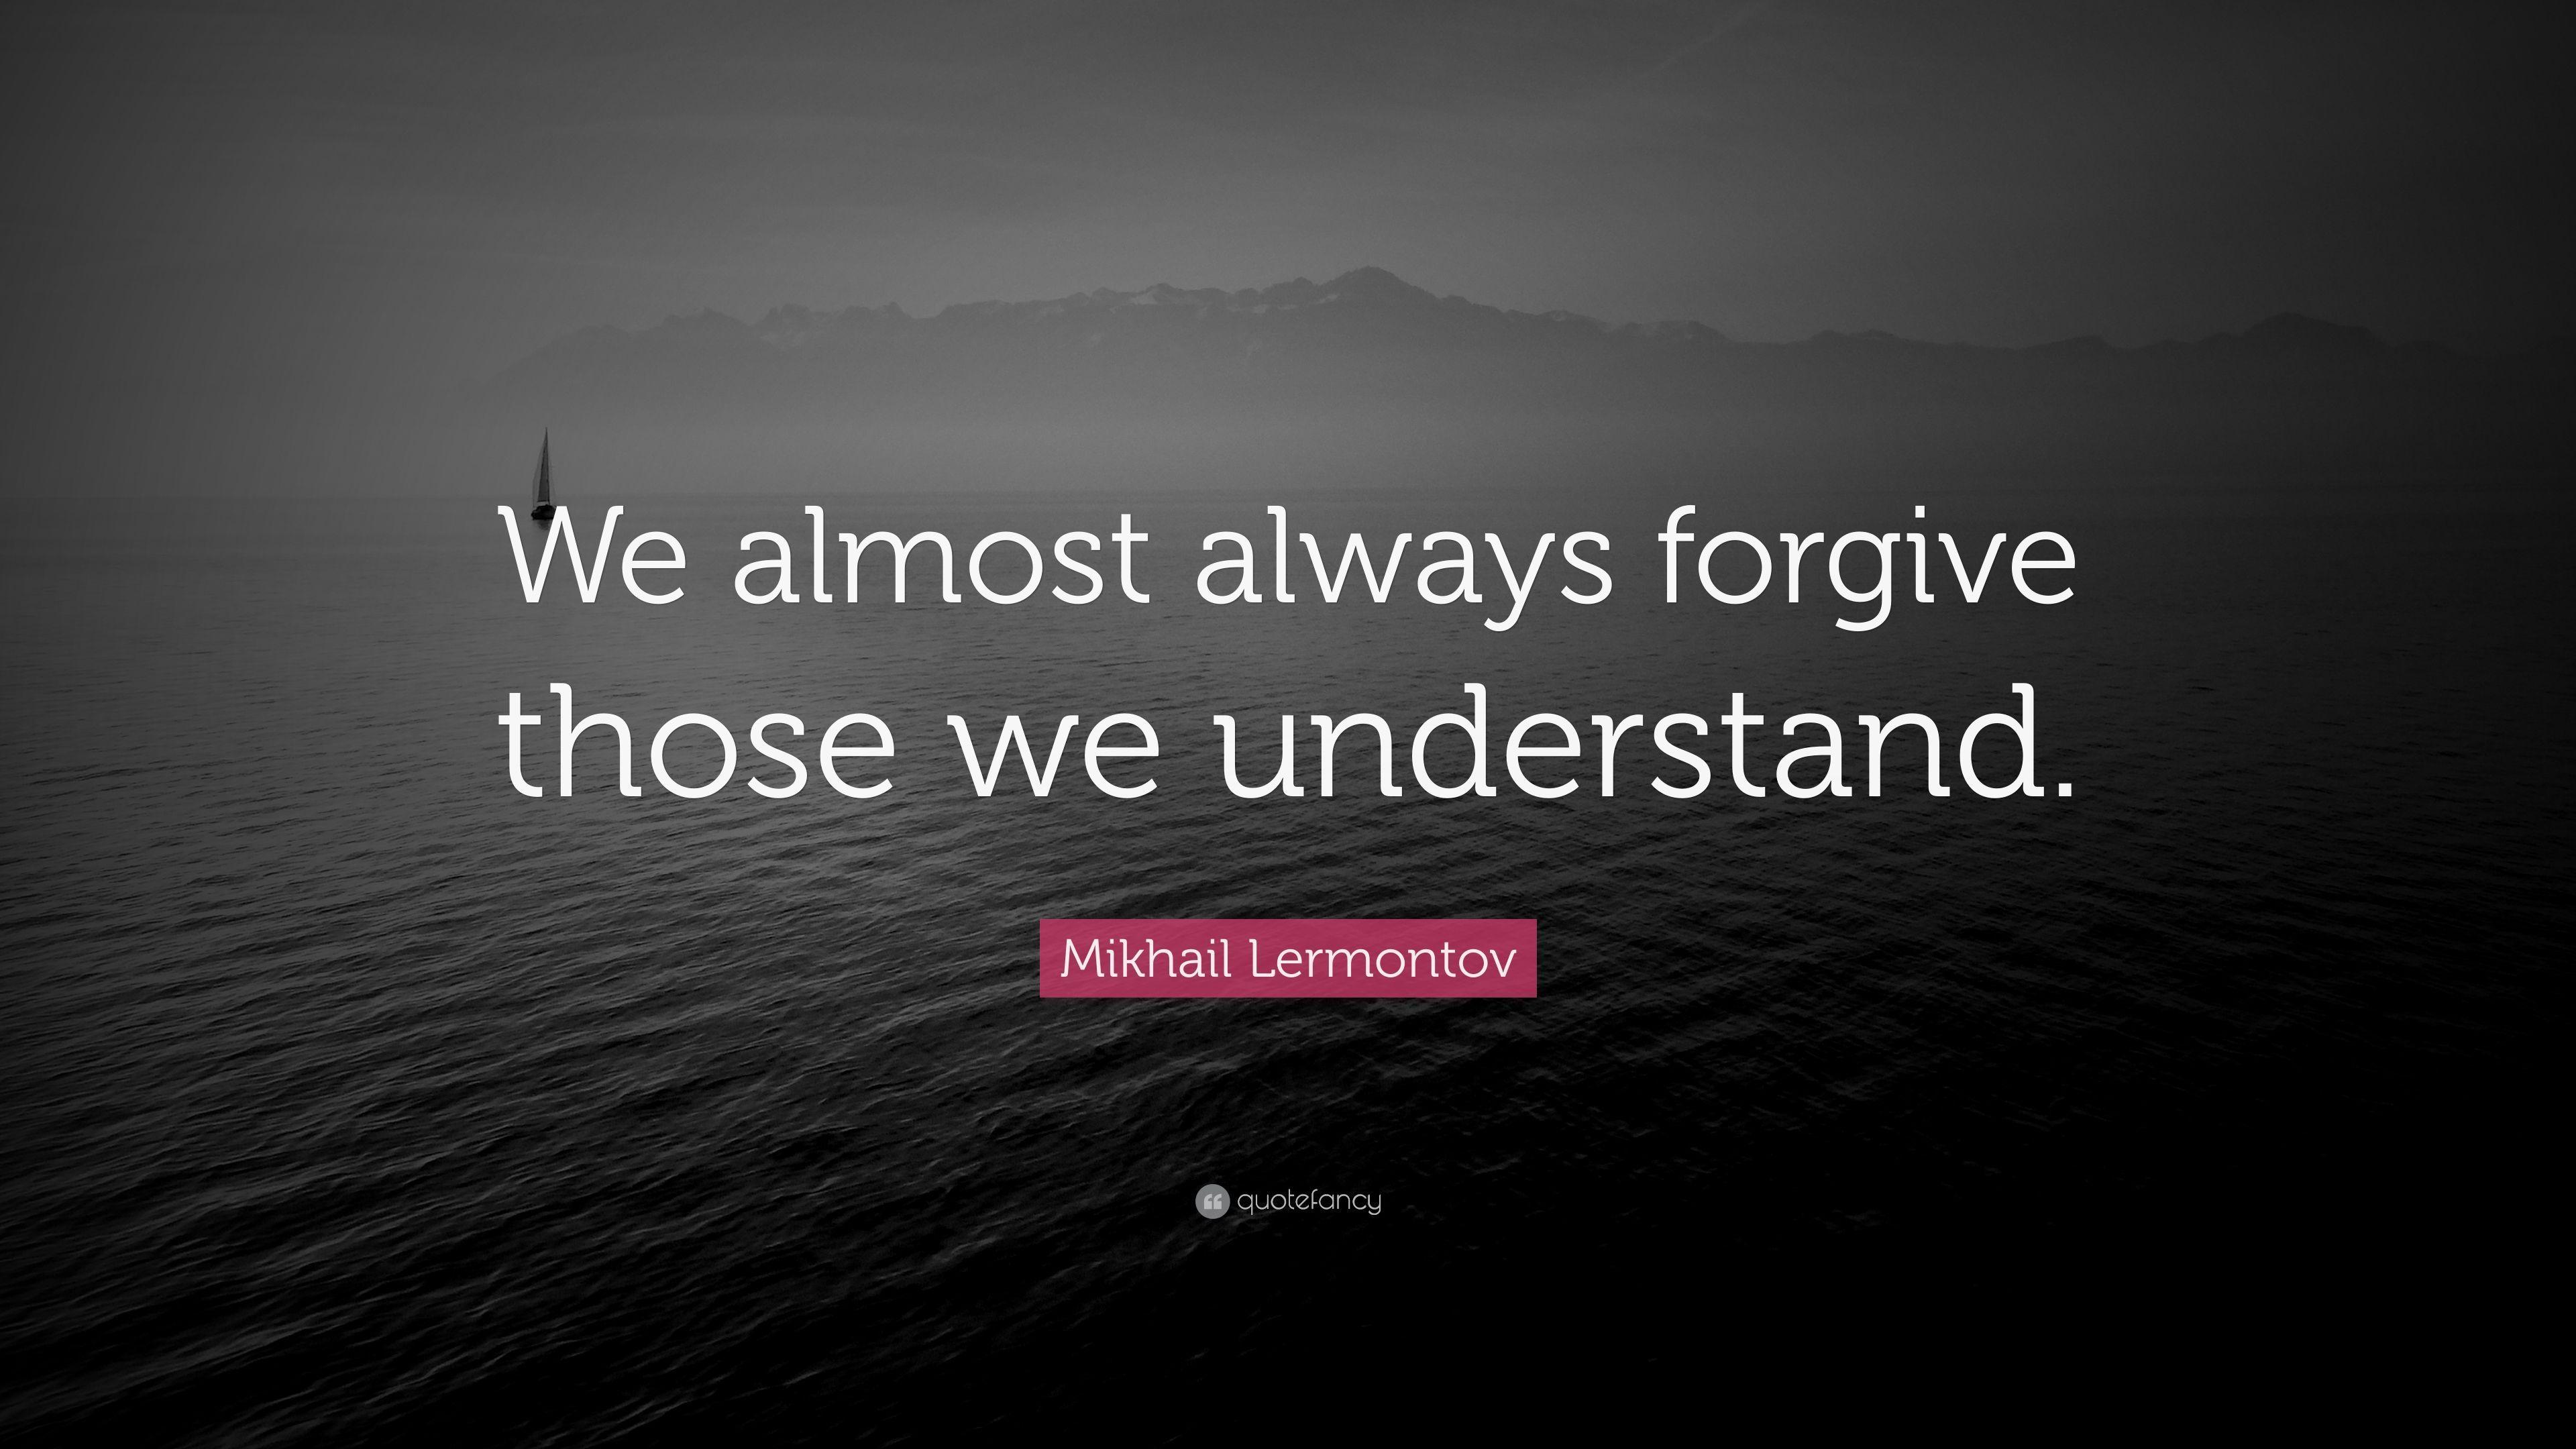 Mikhail Lermontov Quote: “We almost always forgive those we